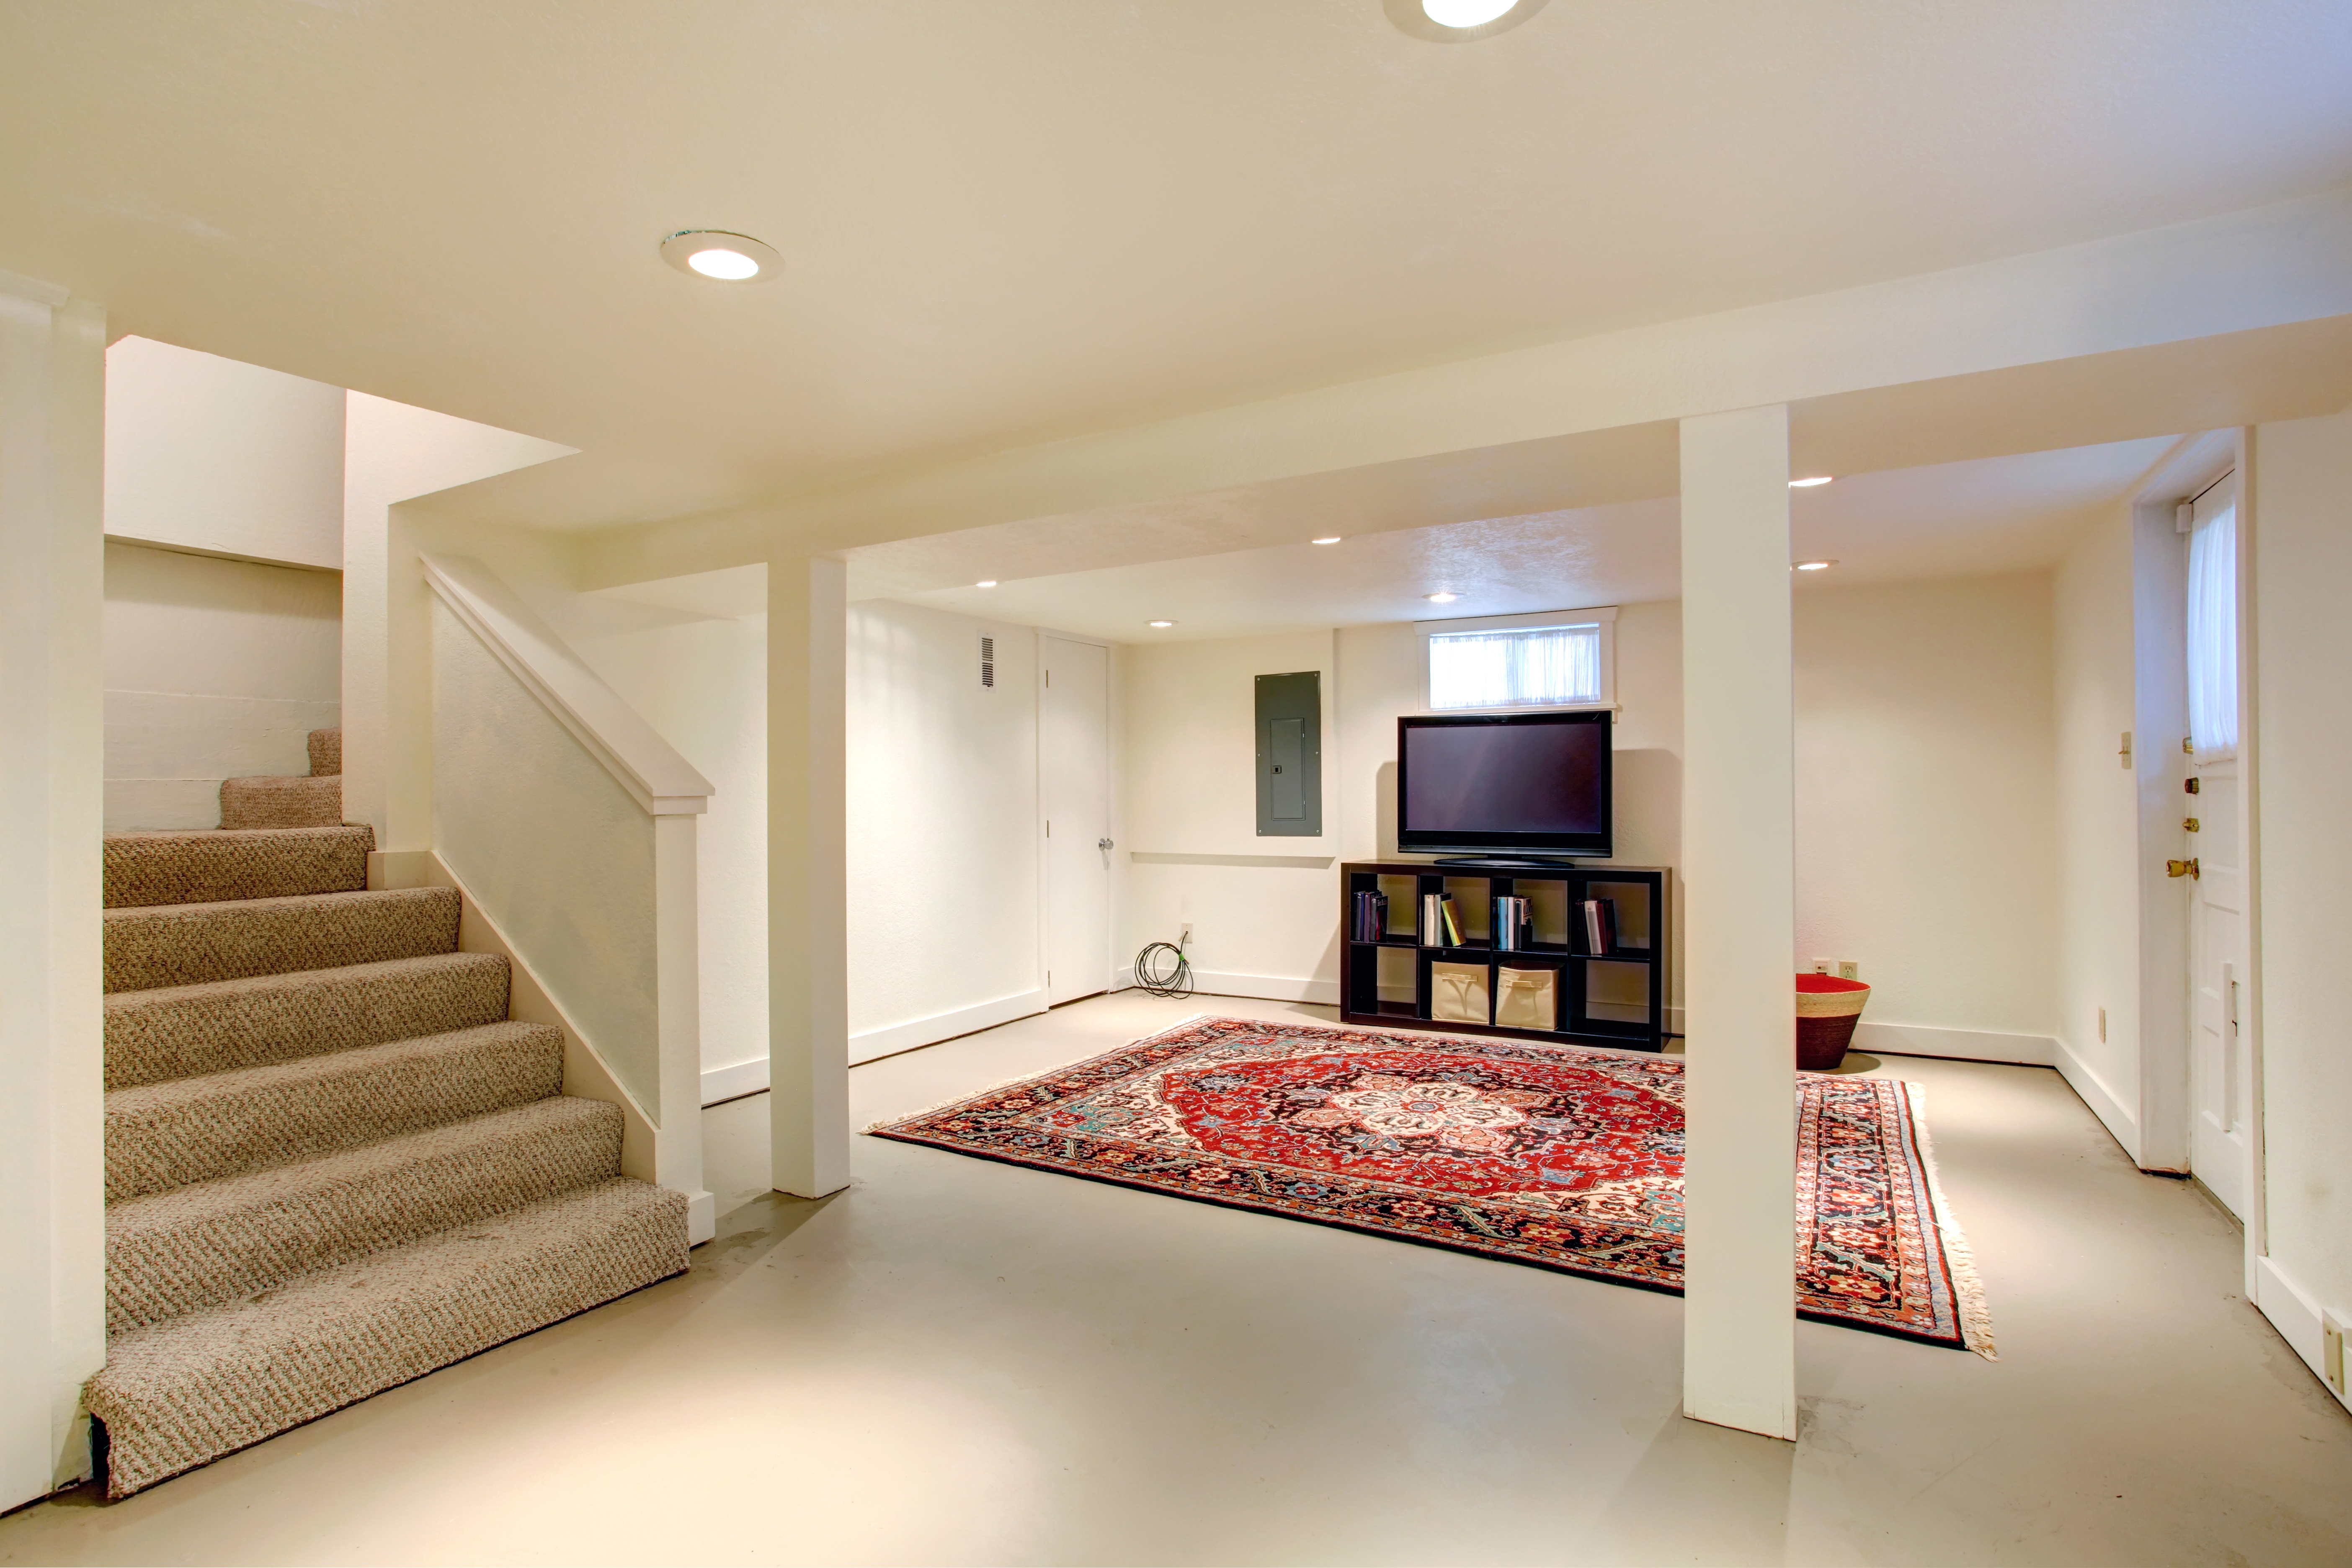 Unfinished Basement Ideas: Budget friendly Transformations